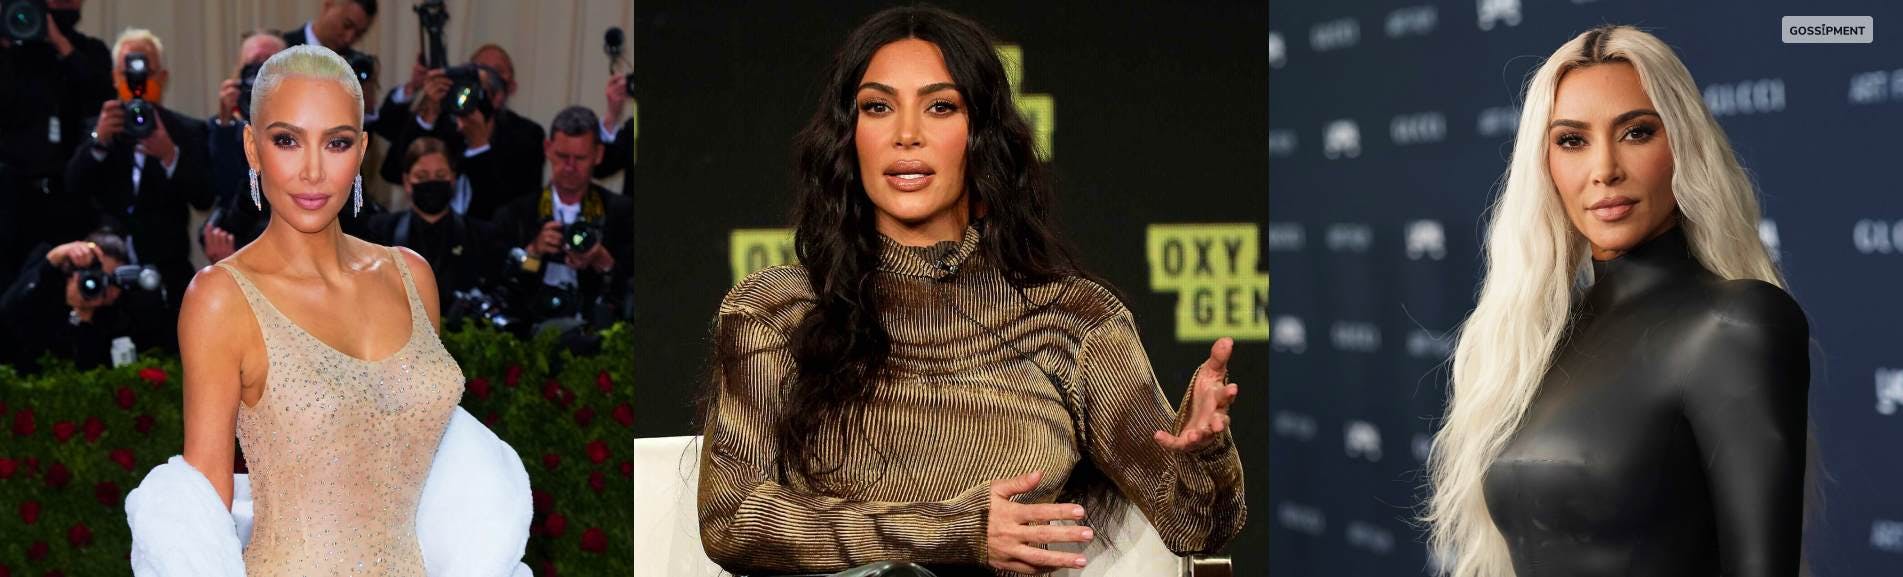 Cover Image for Kim Kardashian Is Coming To Netflix: The Fifth Wheel Is On The Cards!